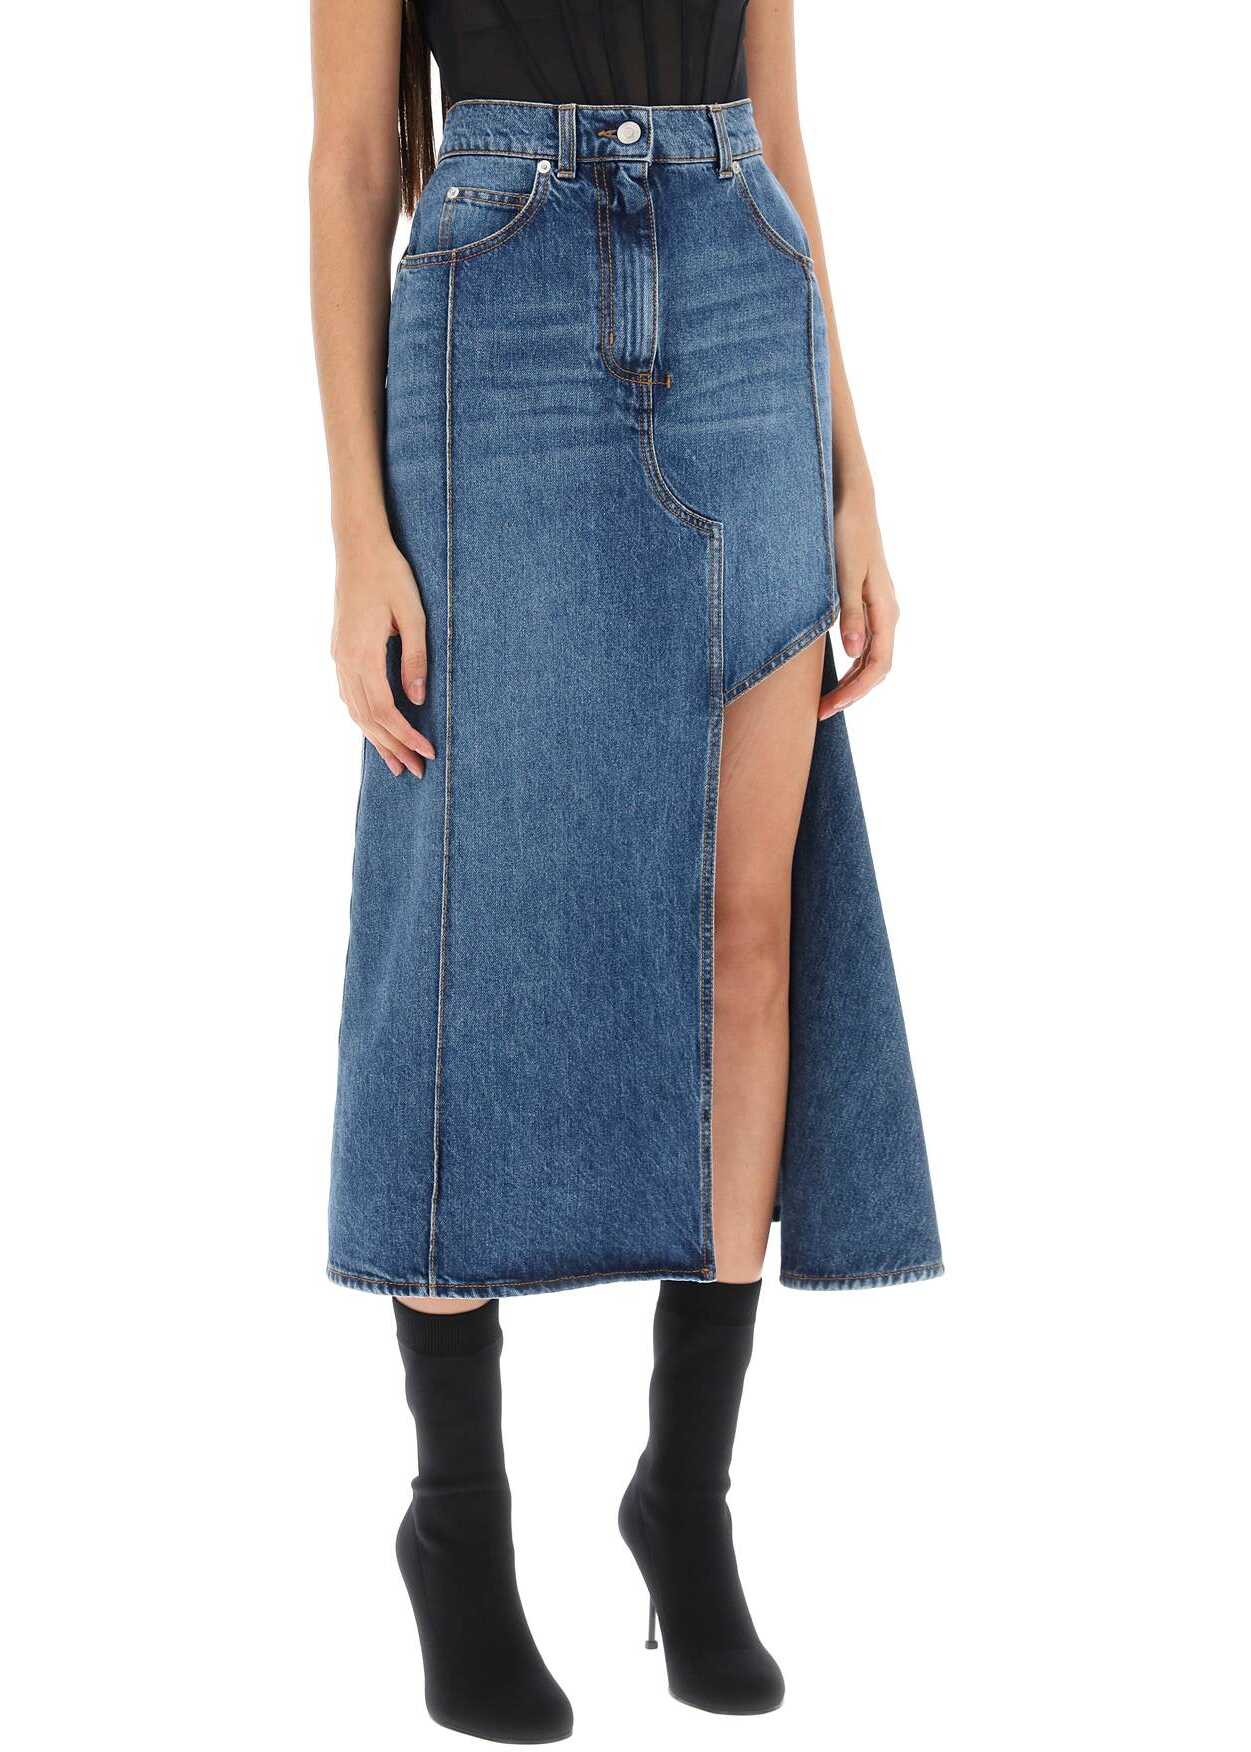 Alexander McQueen Denim Skirt With Cut Out BLUE STONE WASH